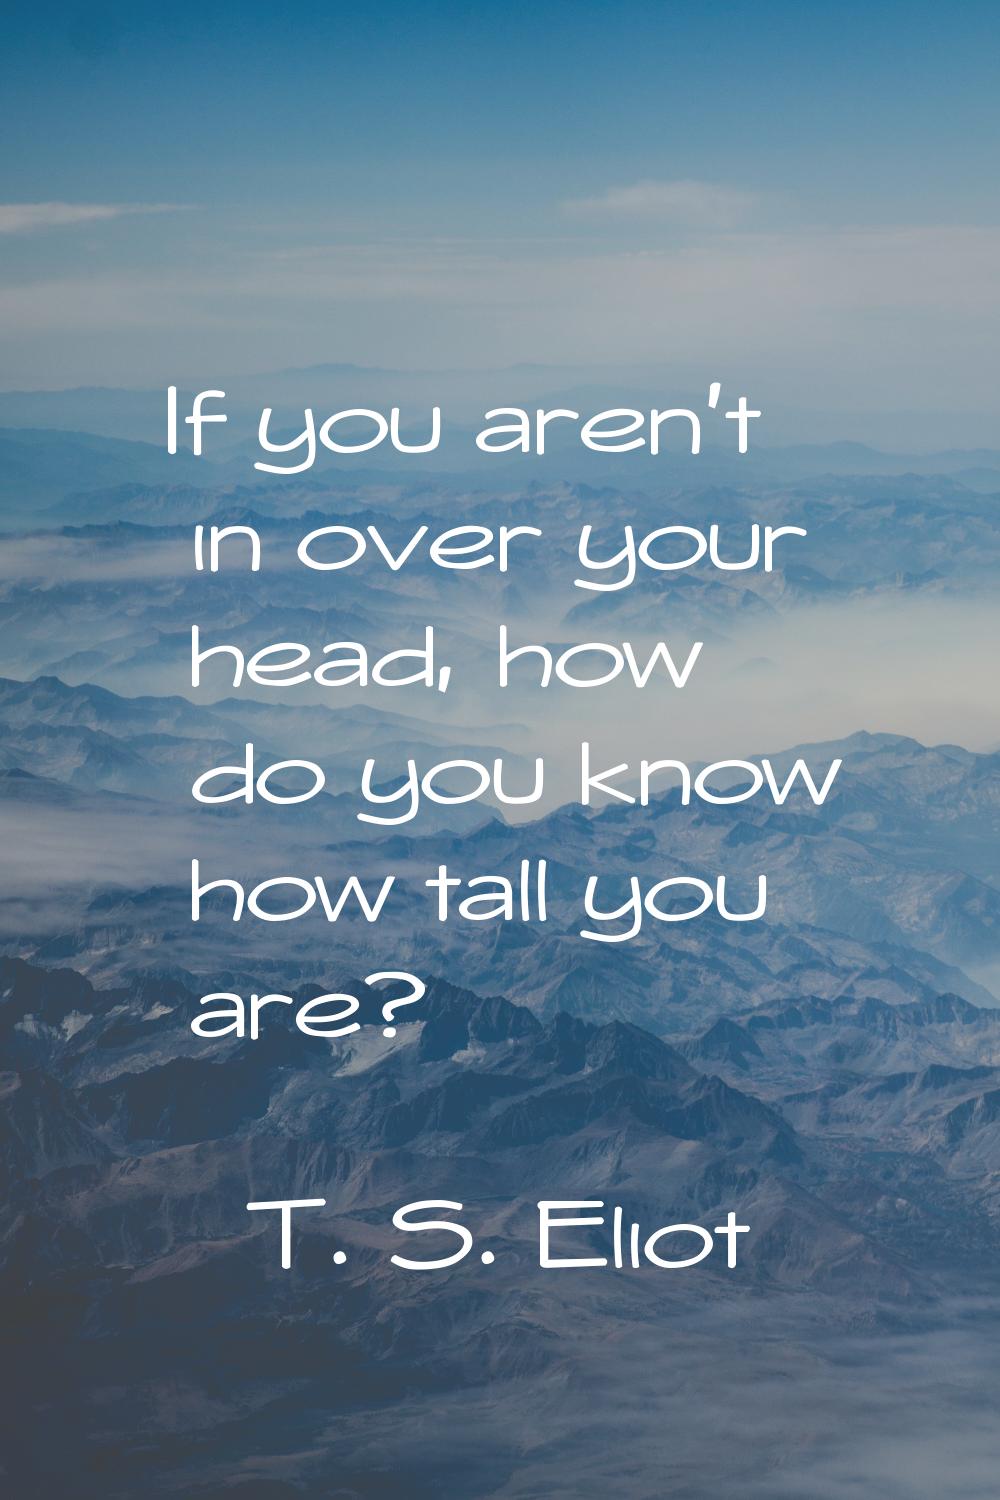 If you aren't in over your head, how do you know how tall you are?